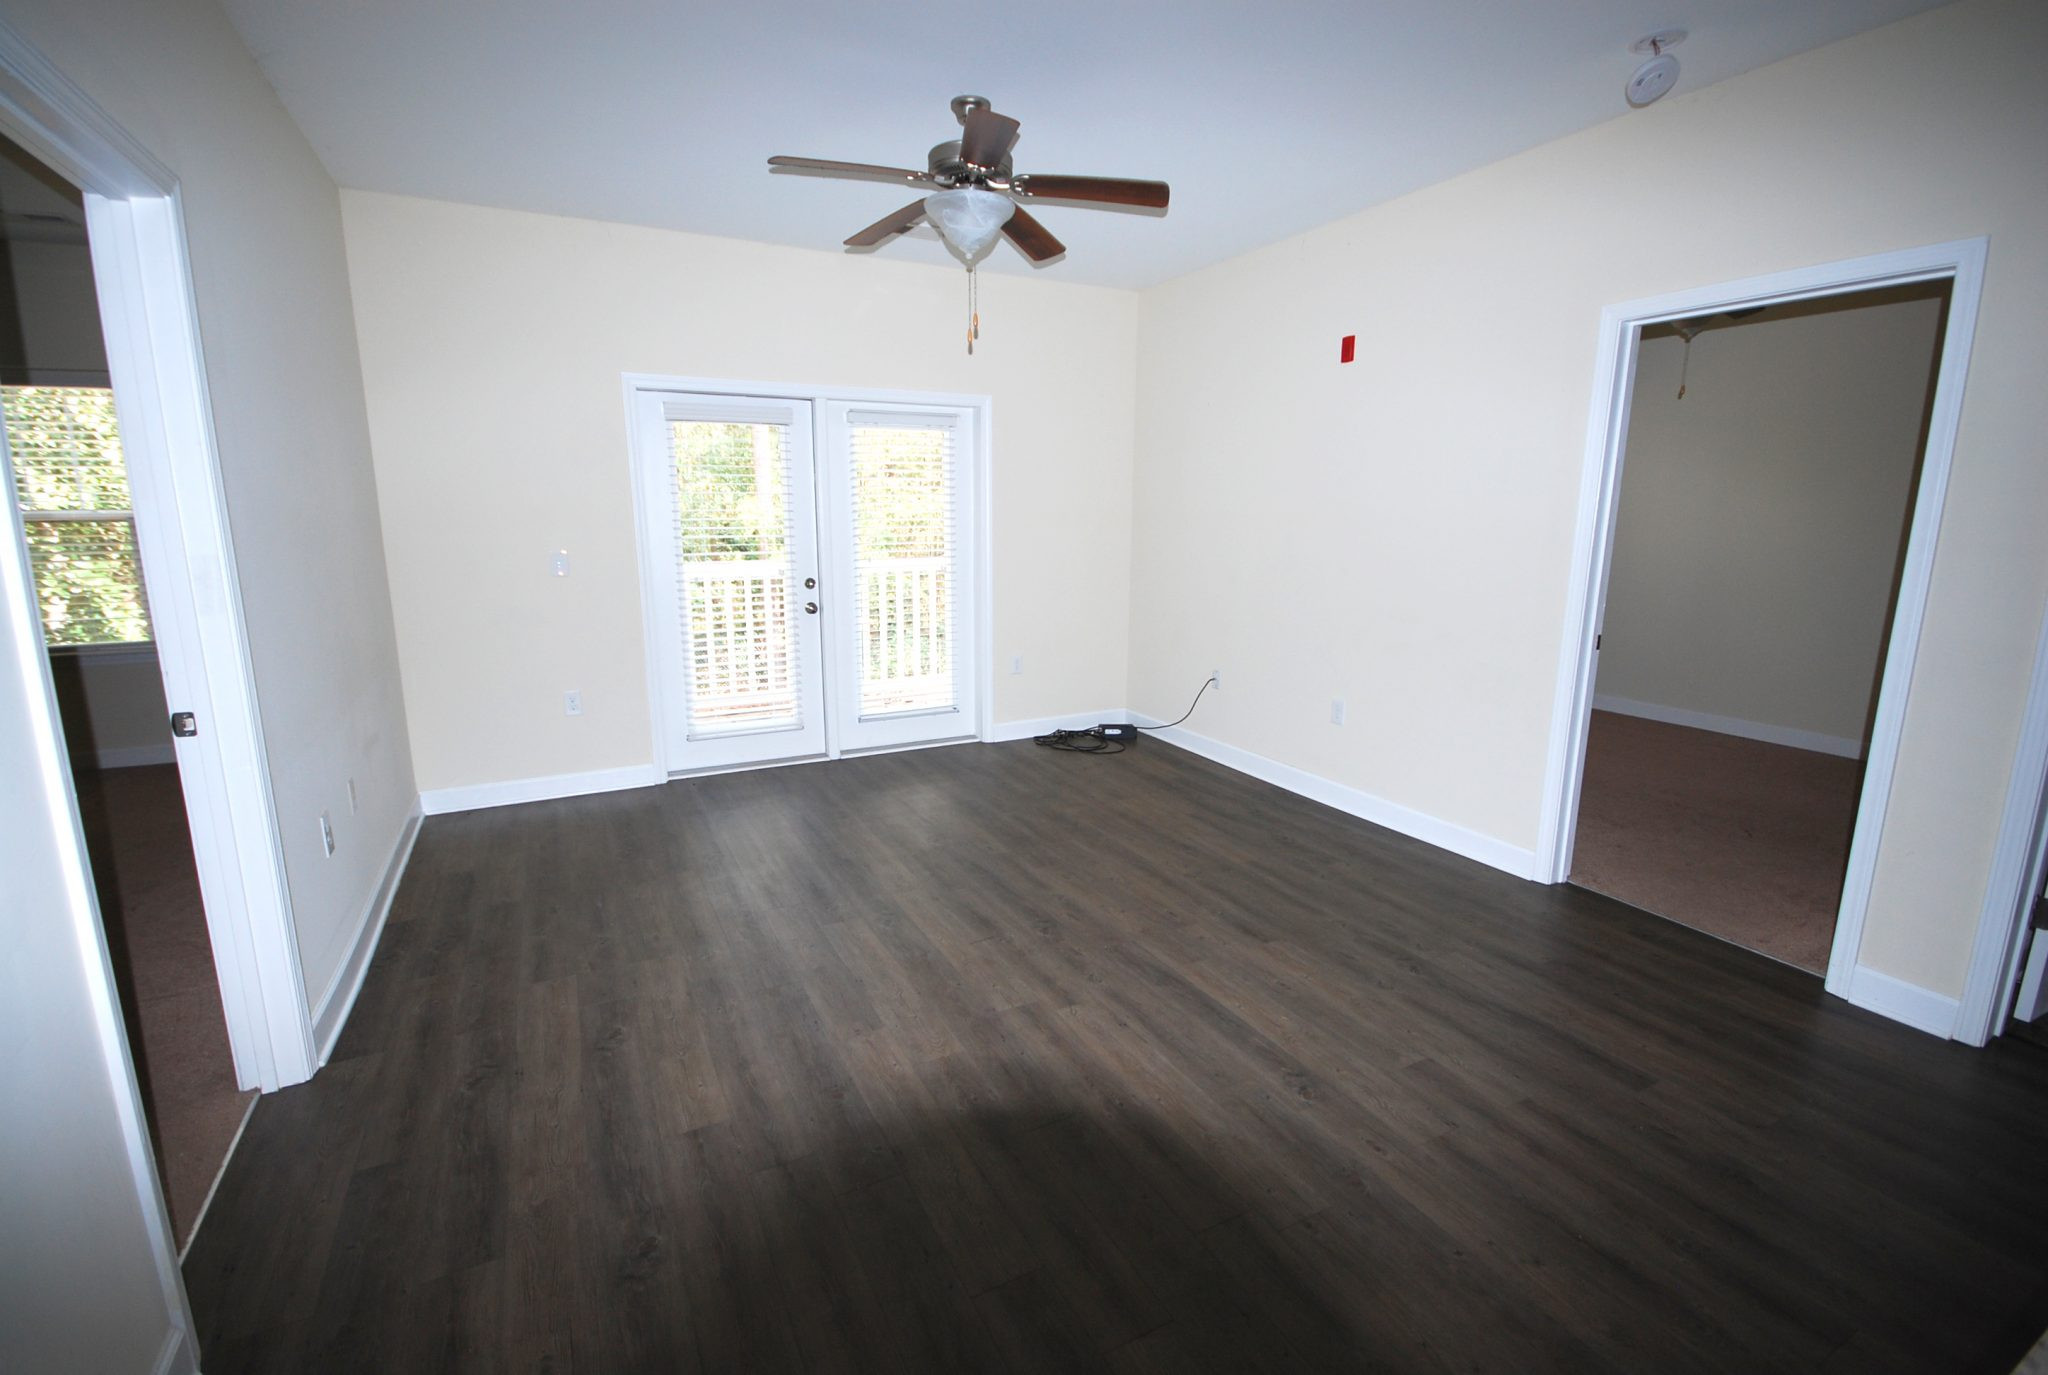 25 Lovable Hardwood Flooring Concord Nc 2024 free download hardwood flooring concord nc of 245 s kerr ave wilmington nc 28403 centrally located newer with oak court apartments of wilmington near randall parkway and walking distance to uncw 245 s